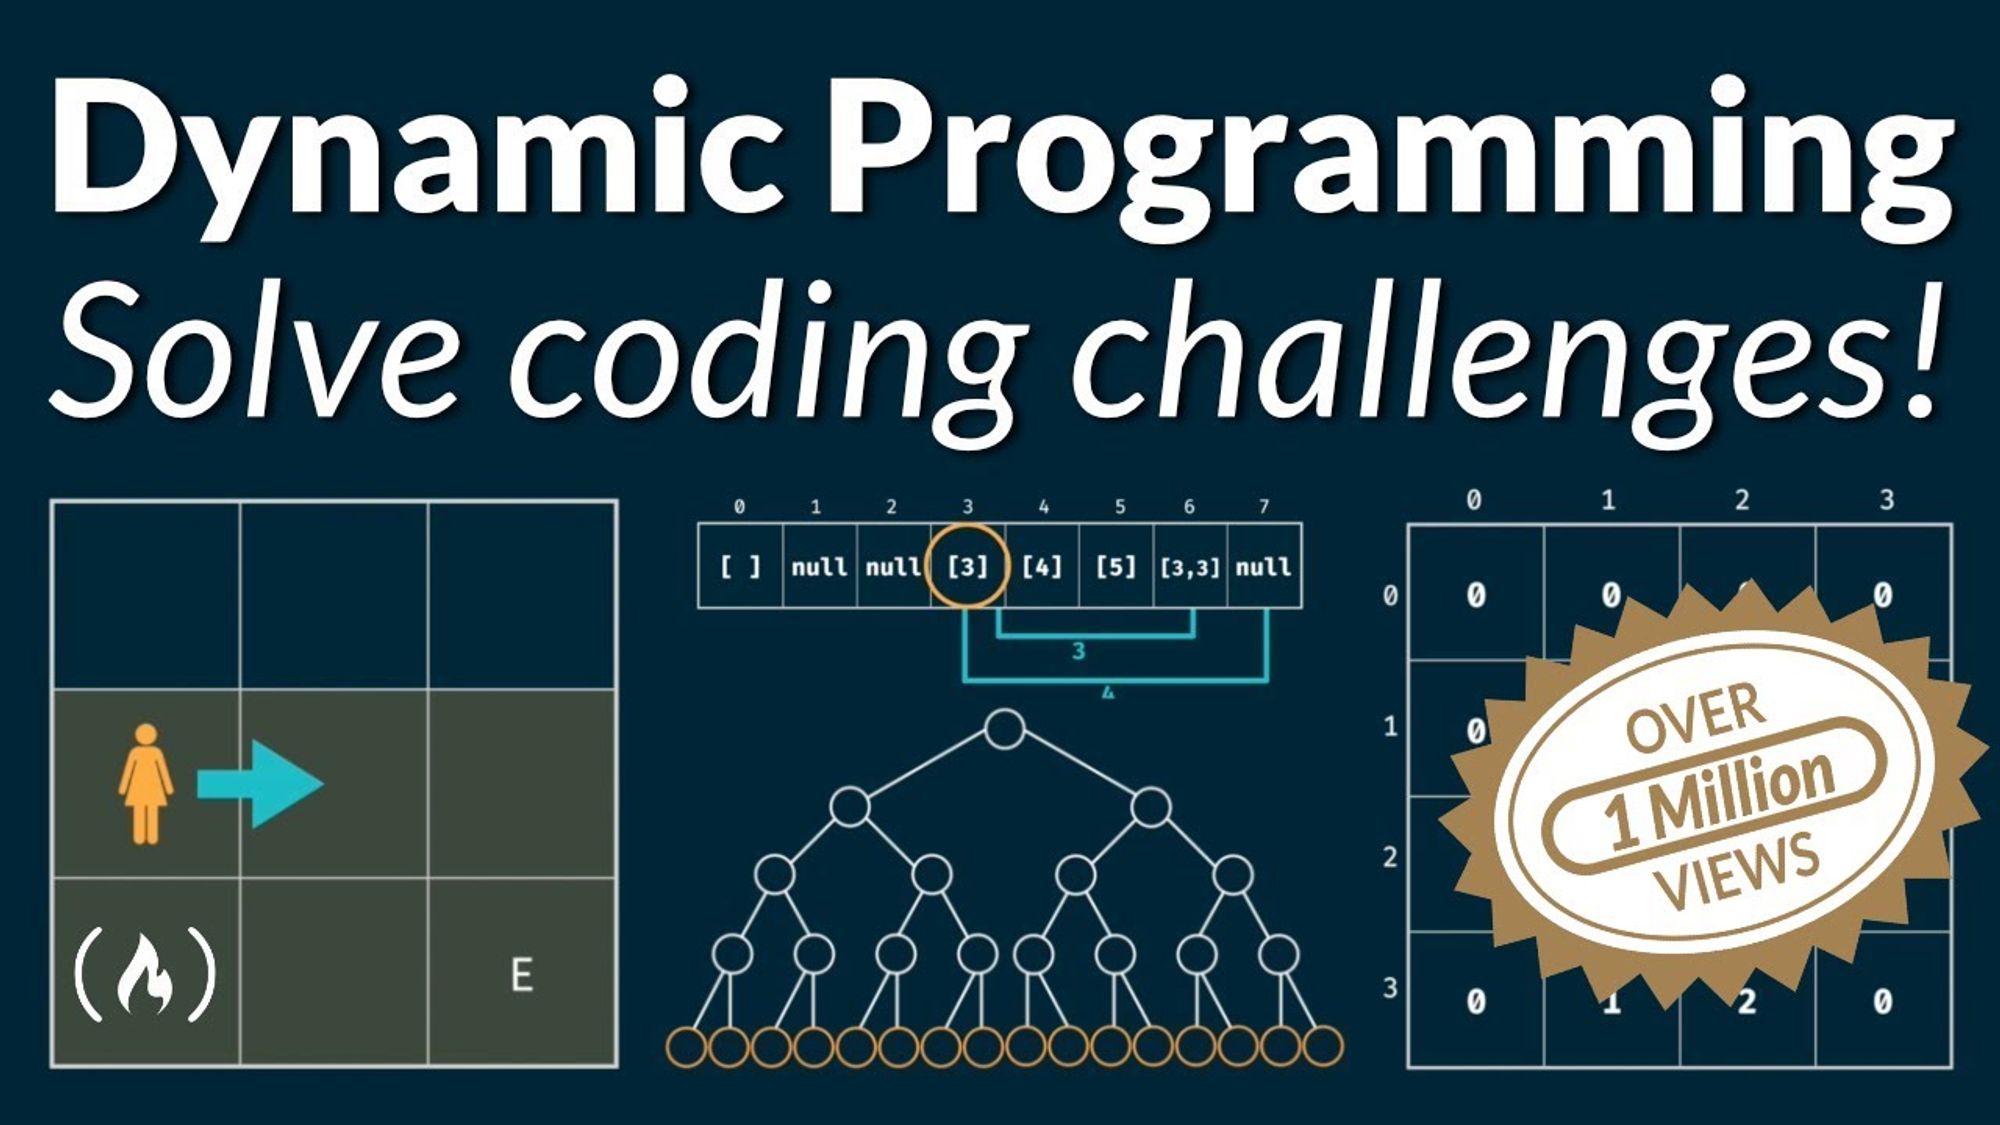 Dynamic Programming - Learn to Solve Algorithmic Problems & Coding Challenges